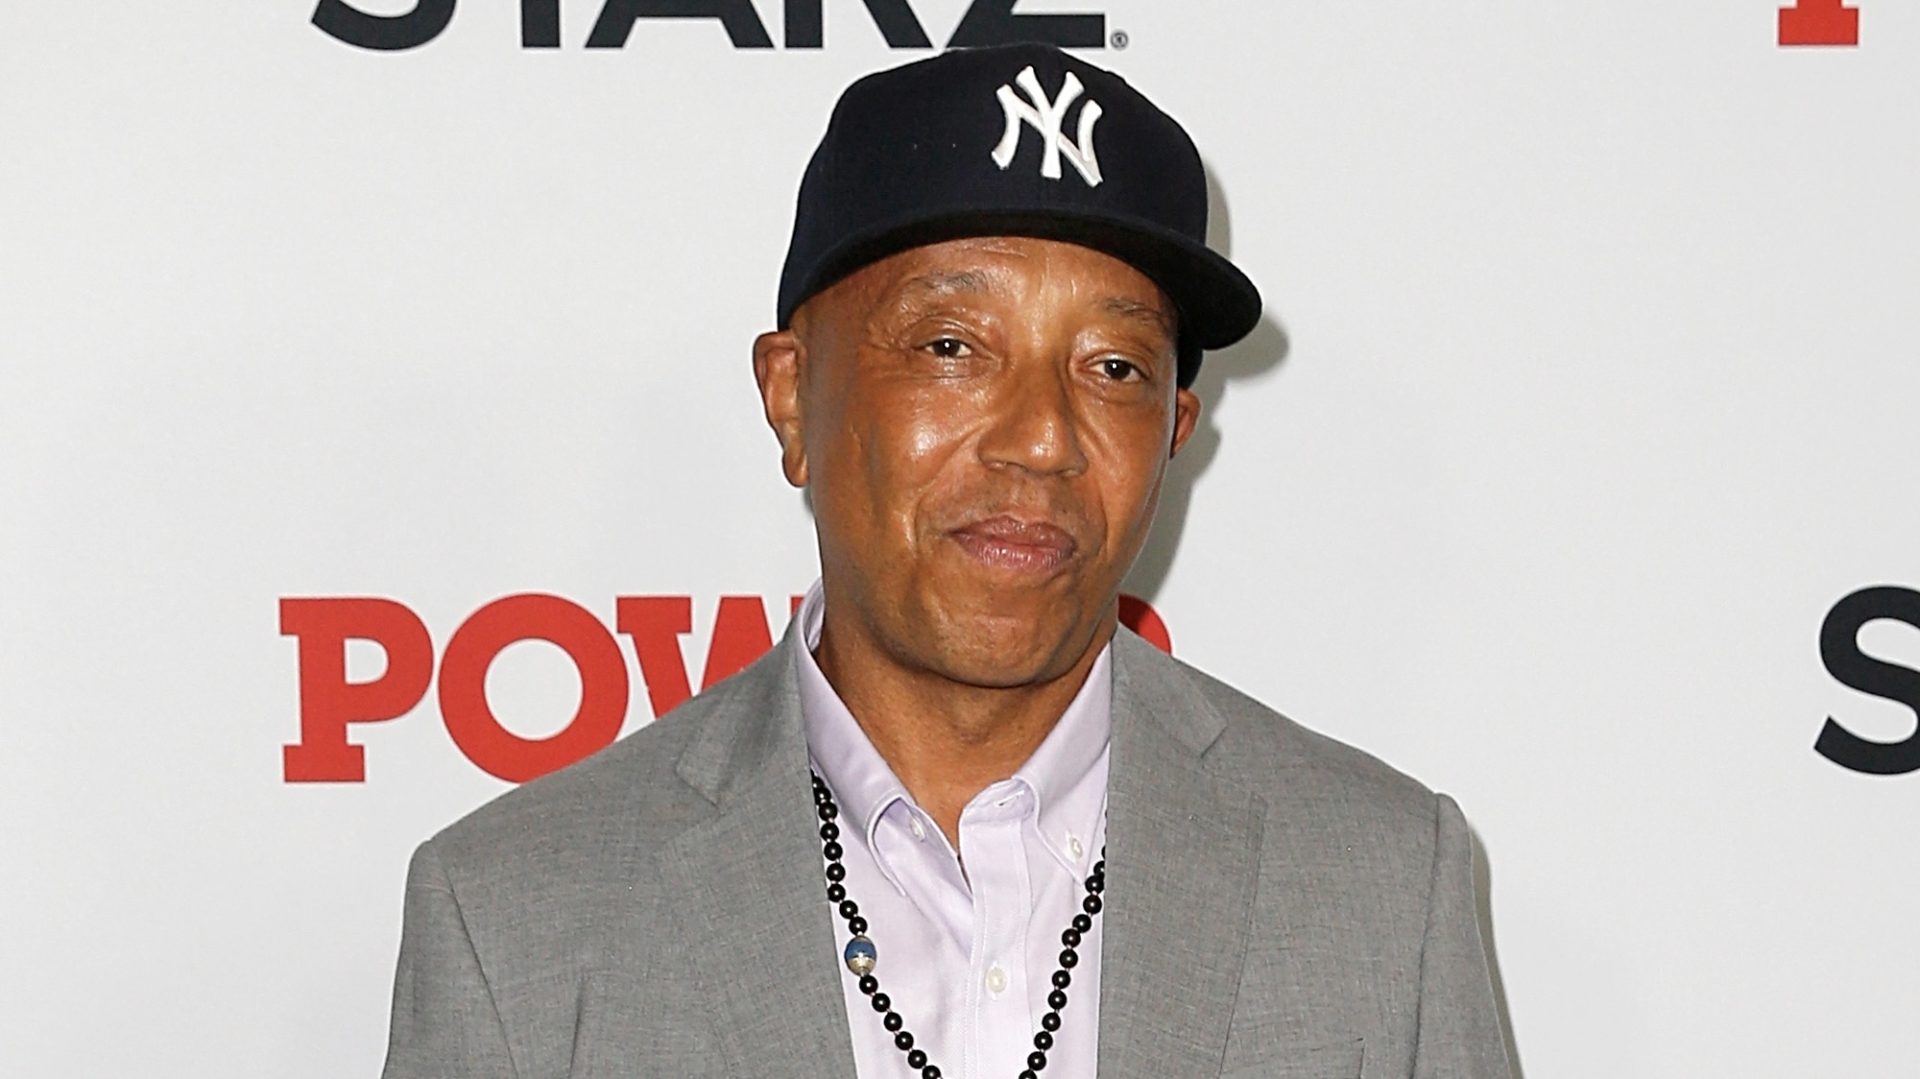 Russell Simmons Opens Up About Taking 9 Lie Detector Tests In Response To Sexual Assault Allegations In New Interview (Video) thumbnail